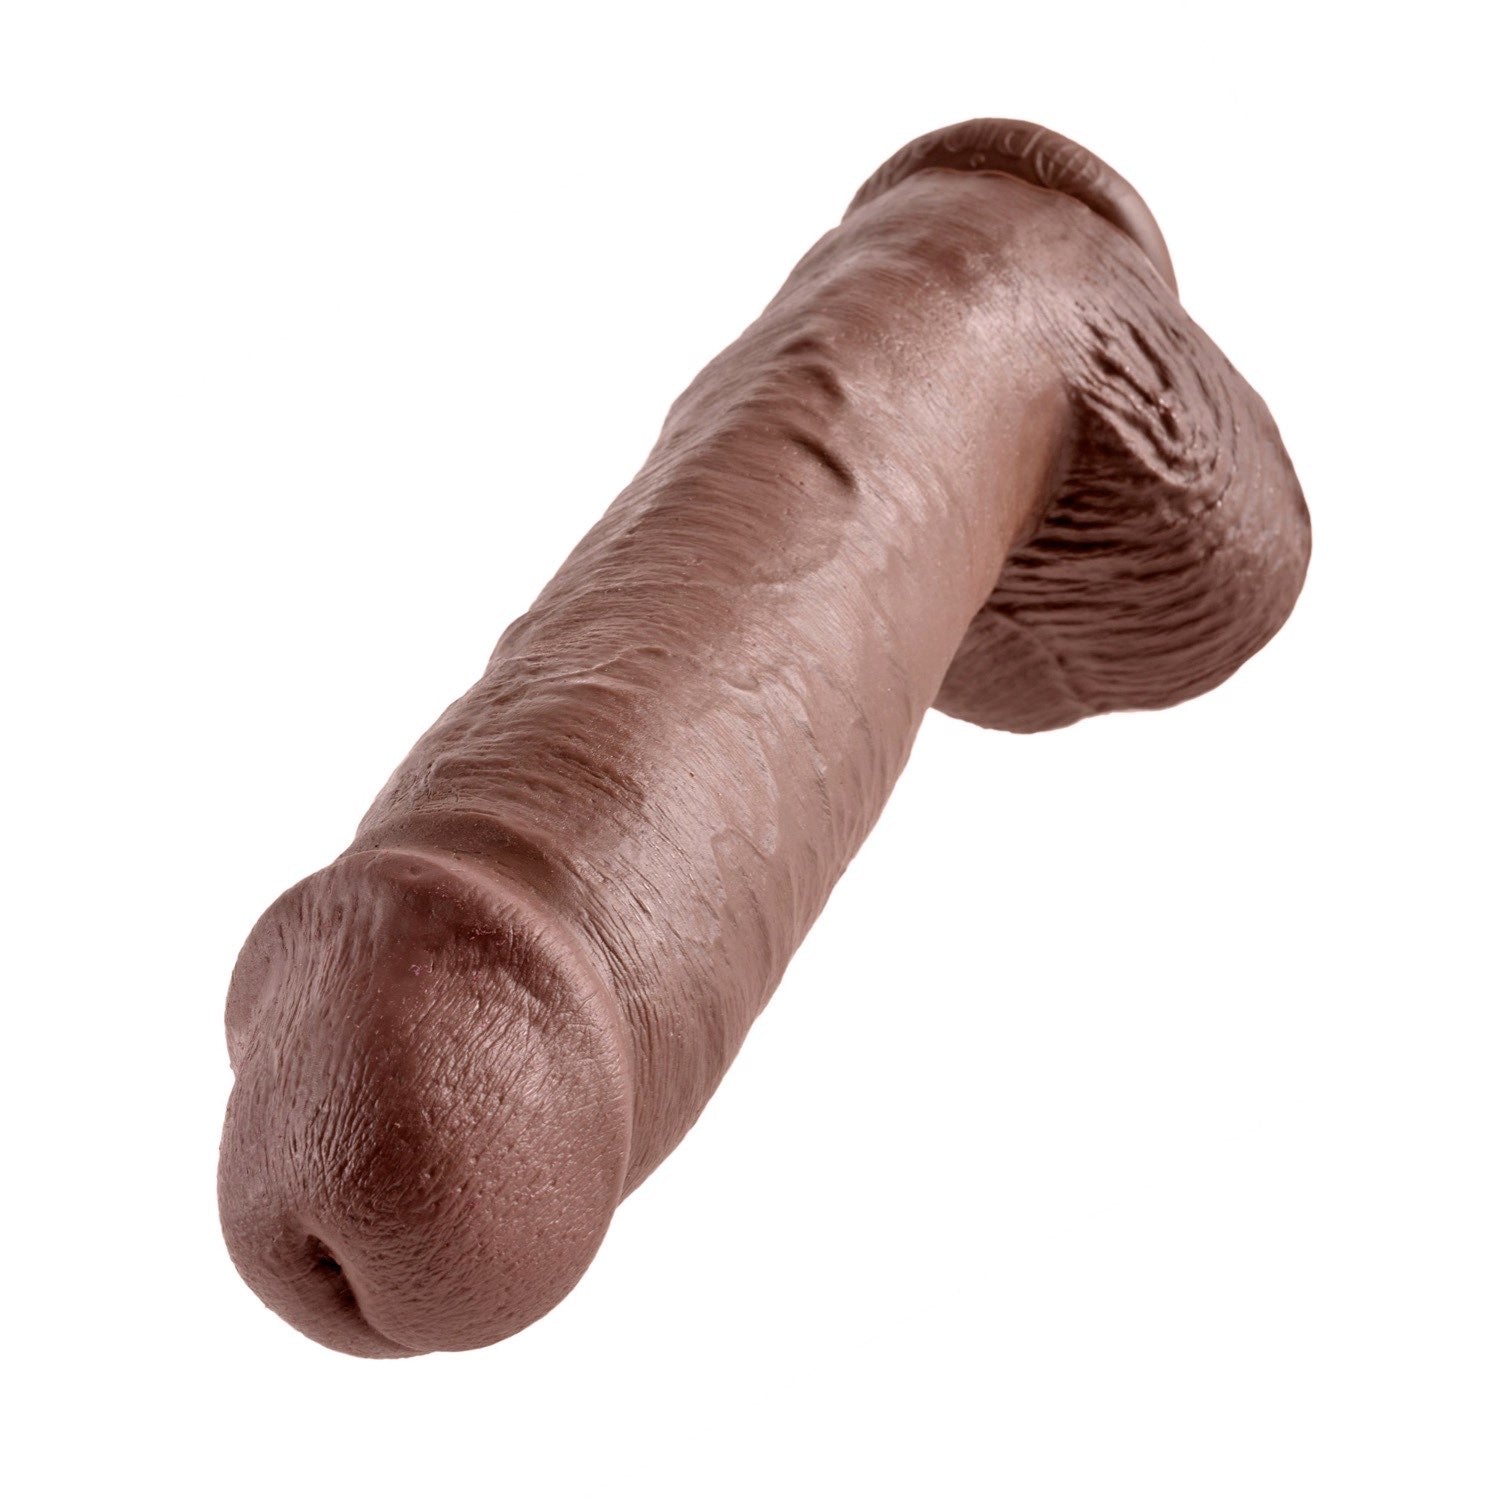 King Cock 11&quot; Cock With Balls - Brown 28 cm (11&quot;) Dong by Pipedream